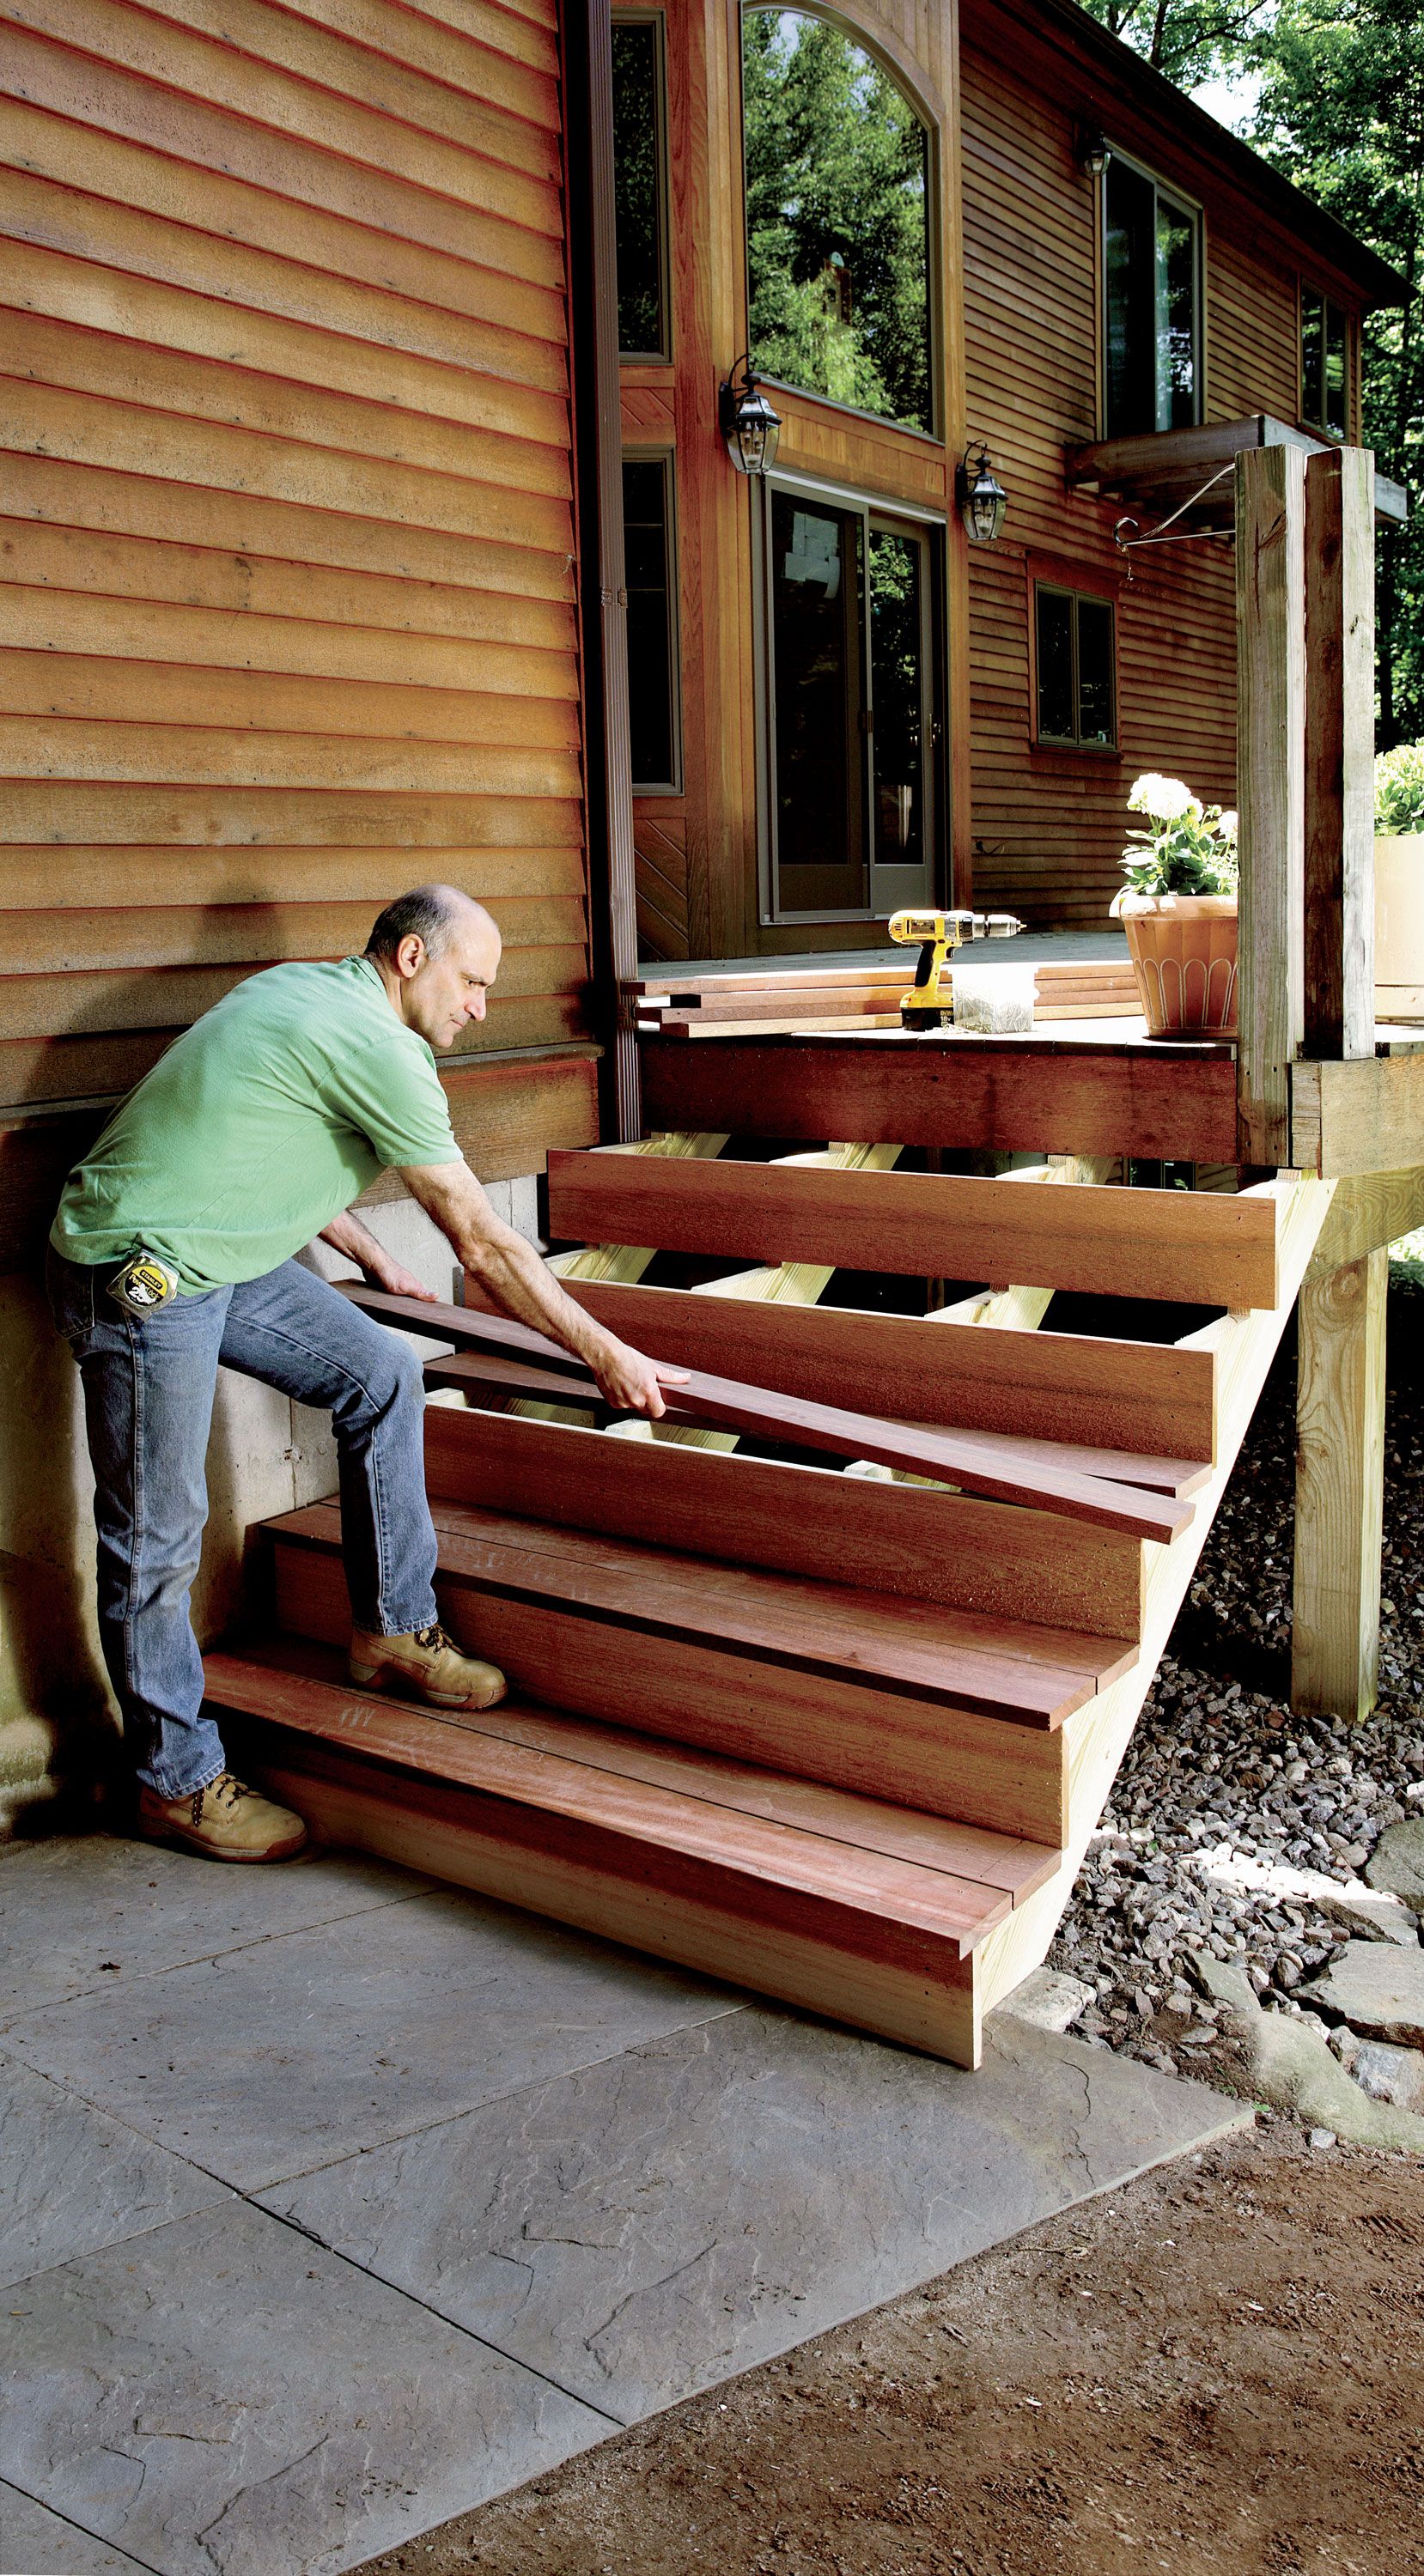 How To Build Stairs Design Plans, Building Wooden Steps For A Porch